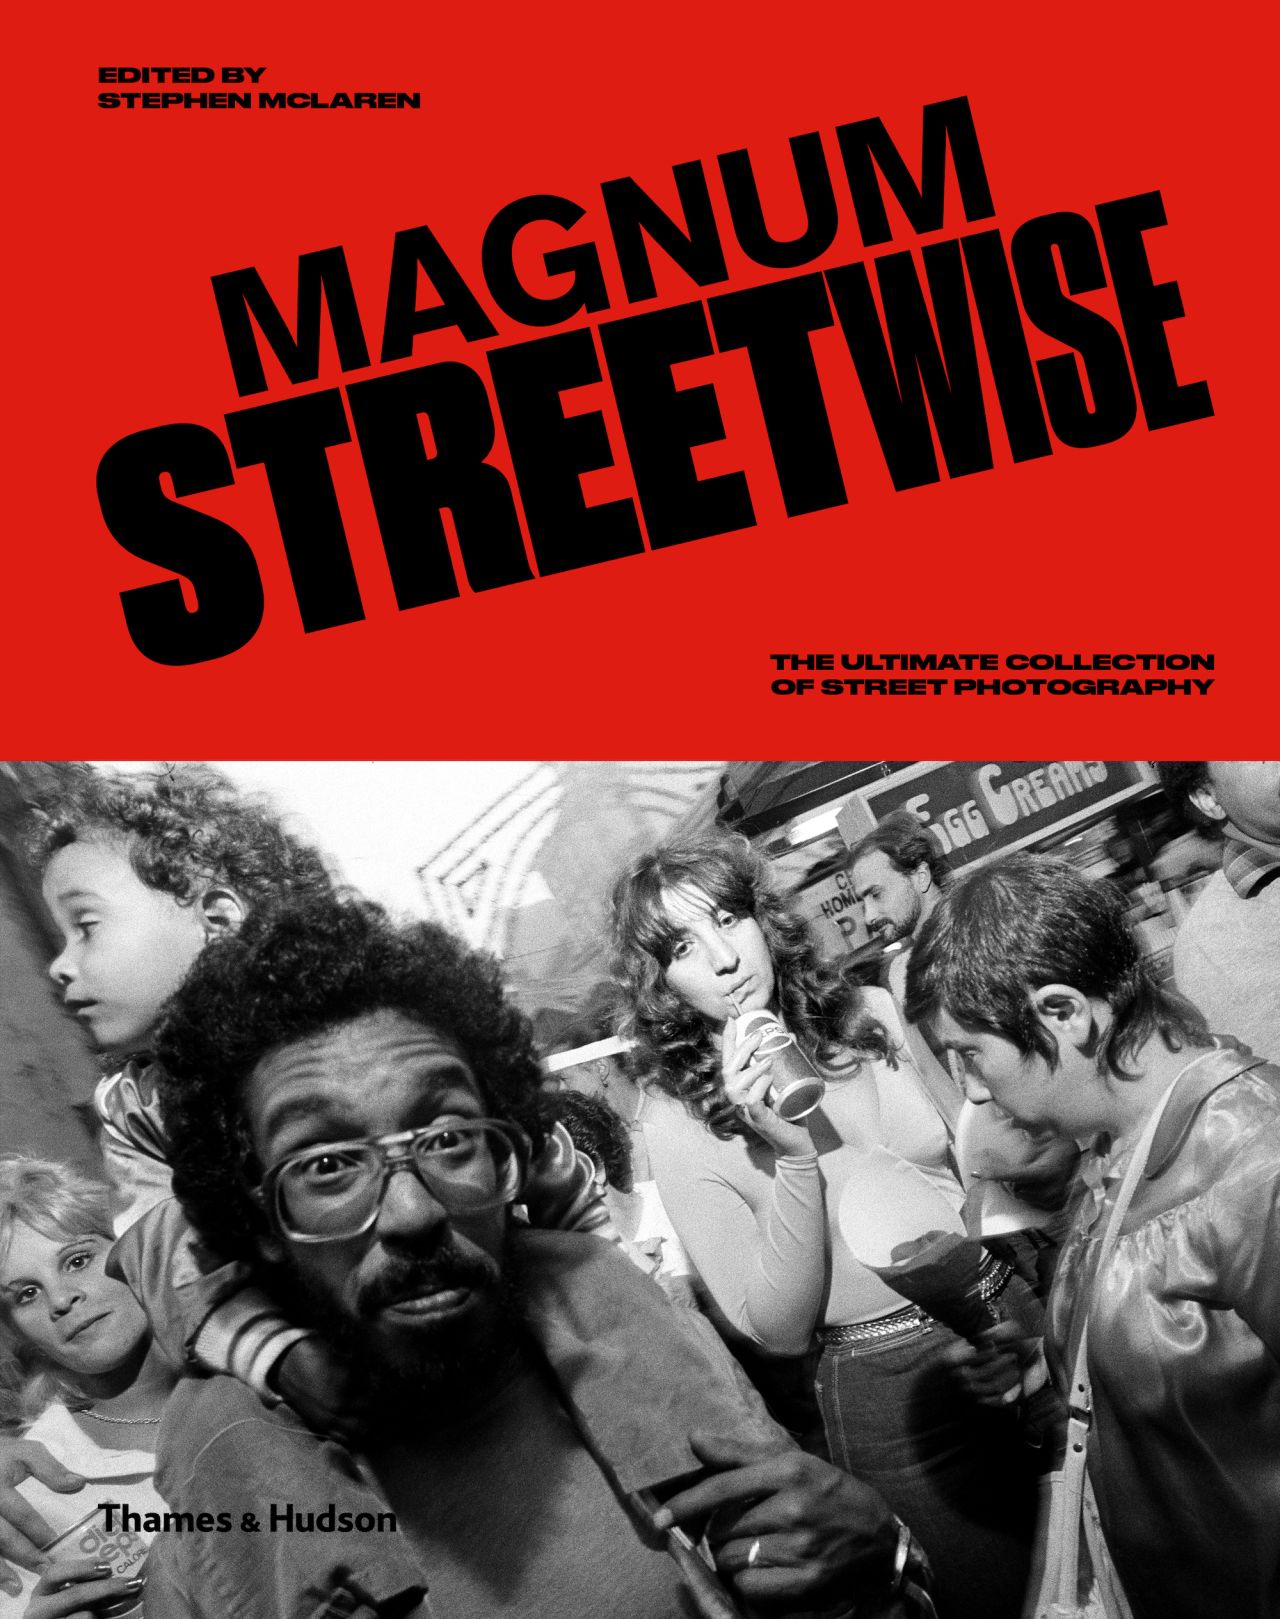 "Magnum Streetwise," published by Thames & Hudson, is available now.